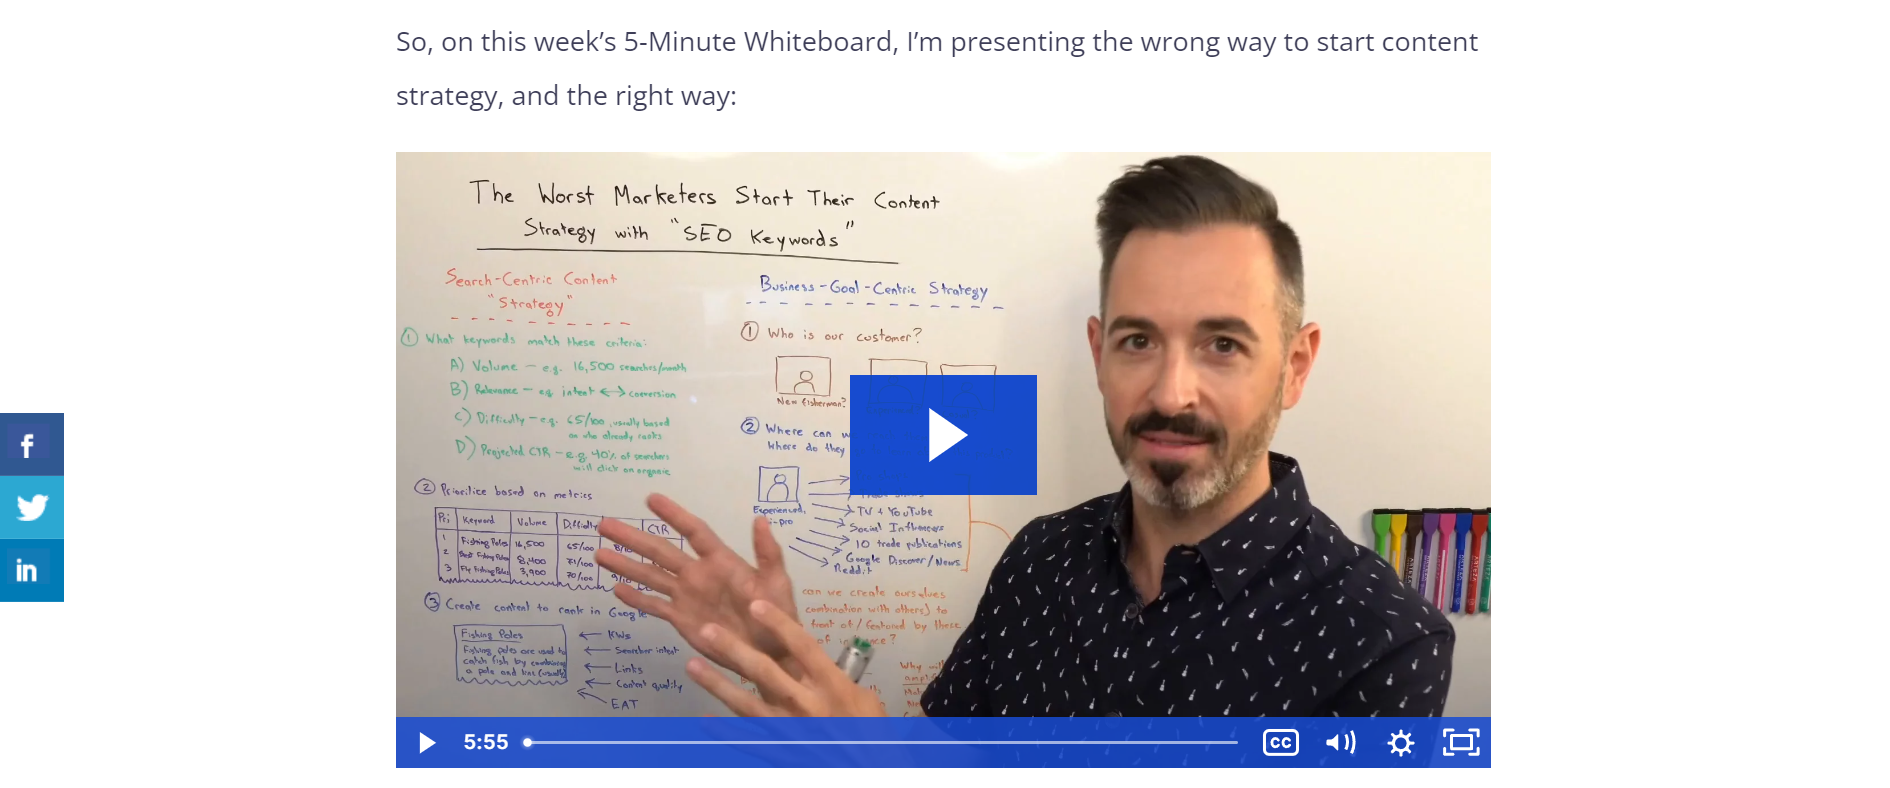 Screenshot: https://sparktoro.com/blog/why-the-worst-search-marketers-start-content-strategy-with-seo-keywords-5-minute-whiteboard/